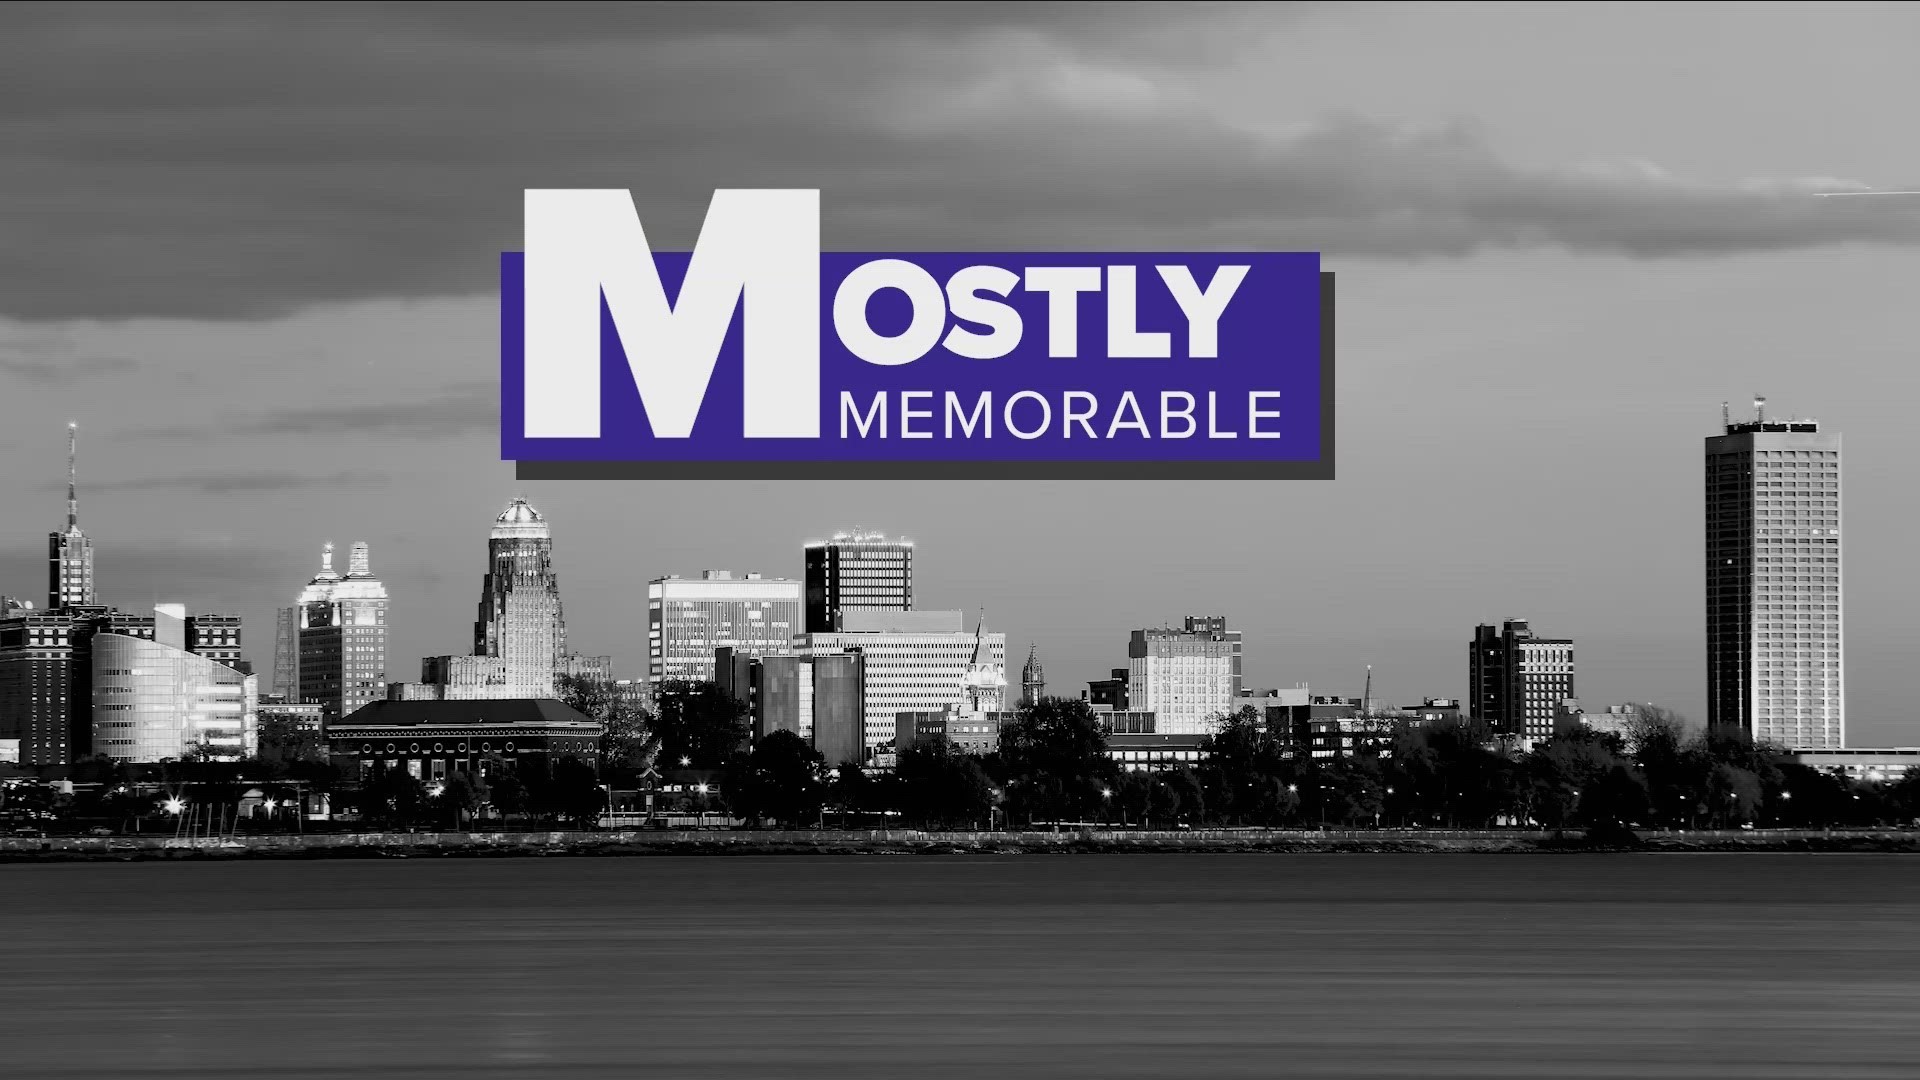 Most Buffalo: Here are some of the Mostly Memorable clips from the week that was.